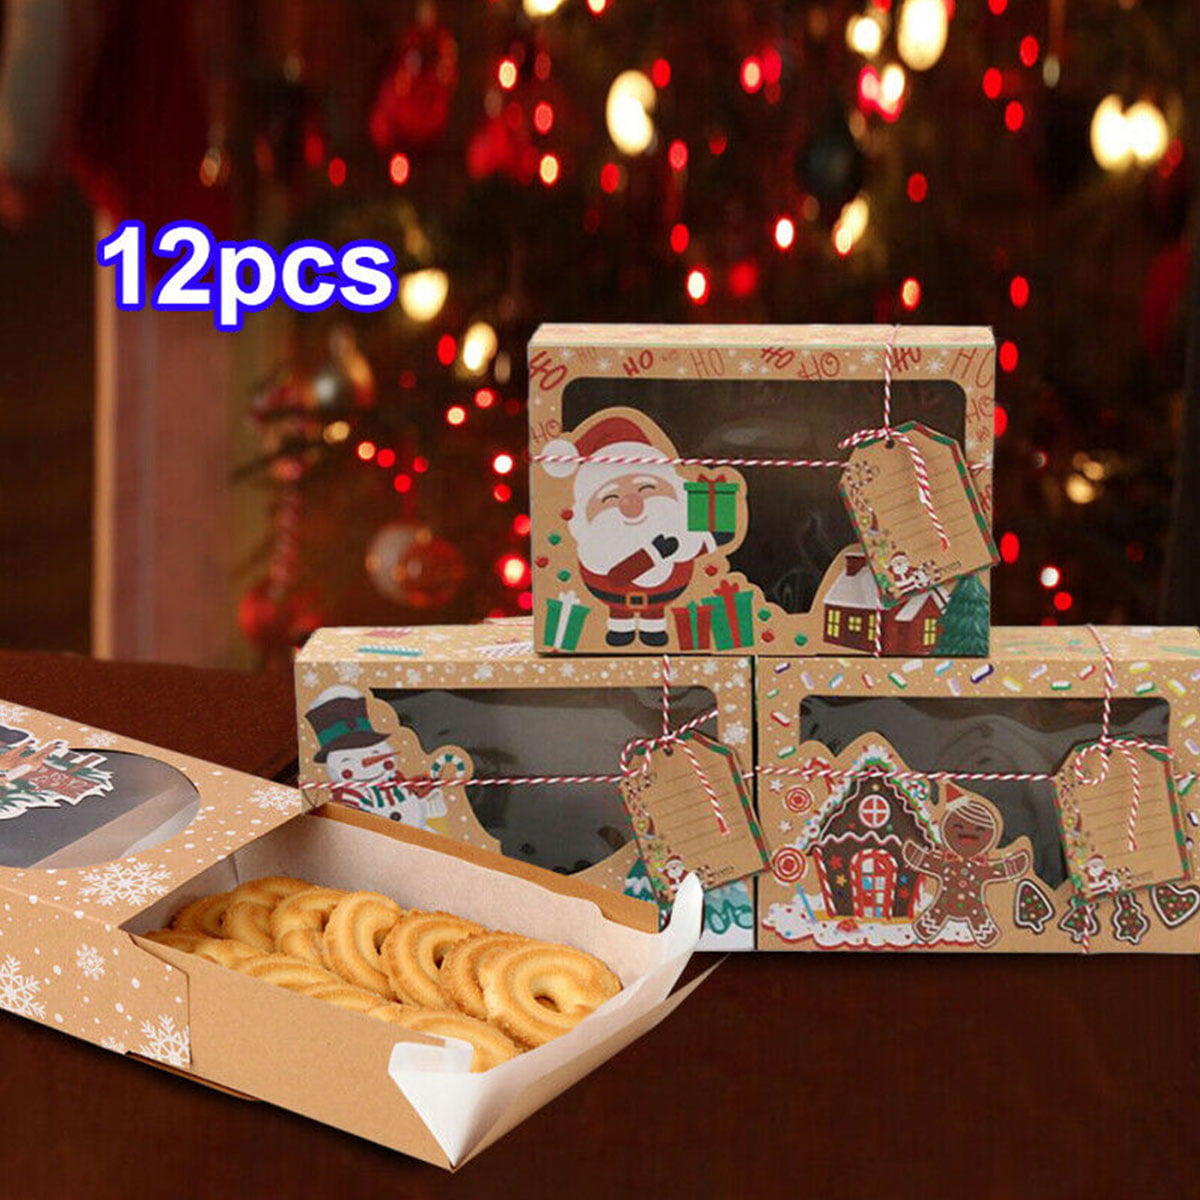 4 x CHRISTMAS GIFT BOXES COOKIES SWEET With Clear Window sweet festive cake xmas 